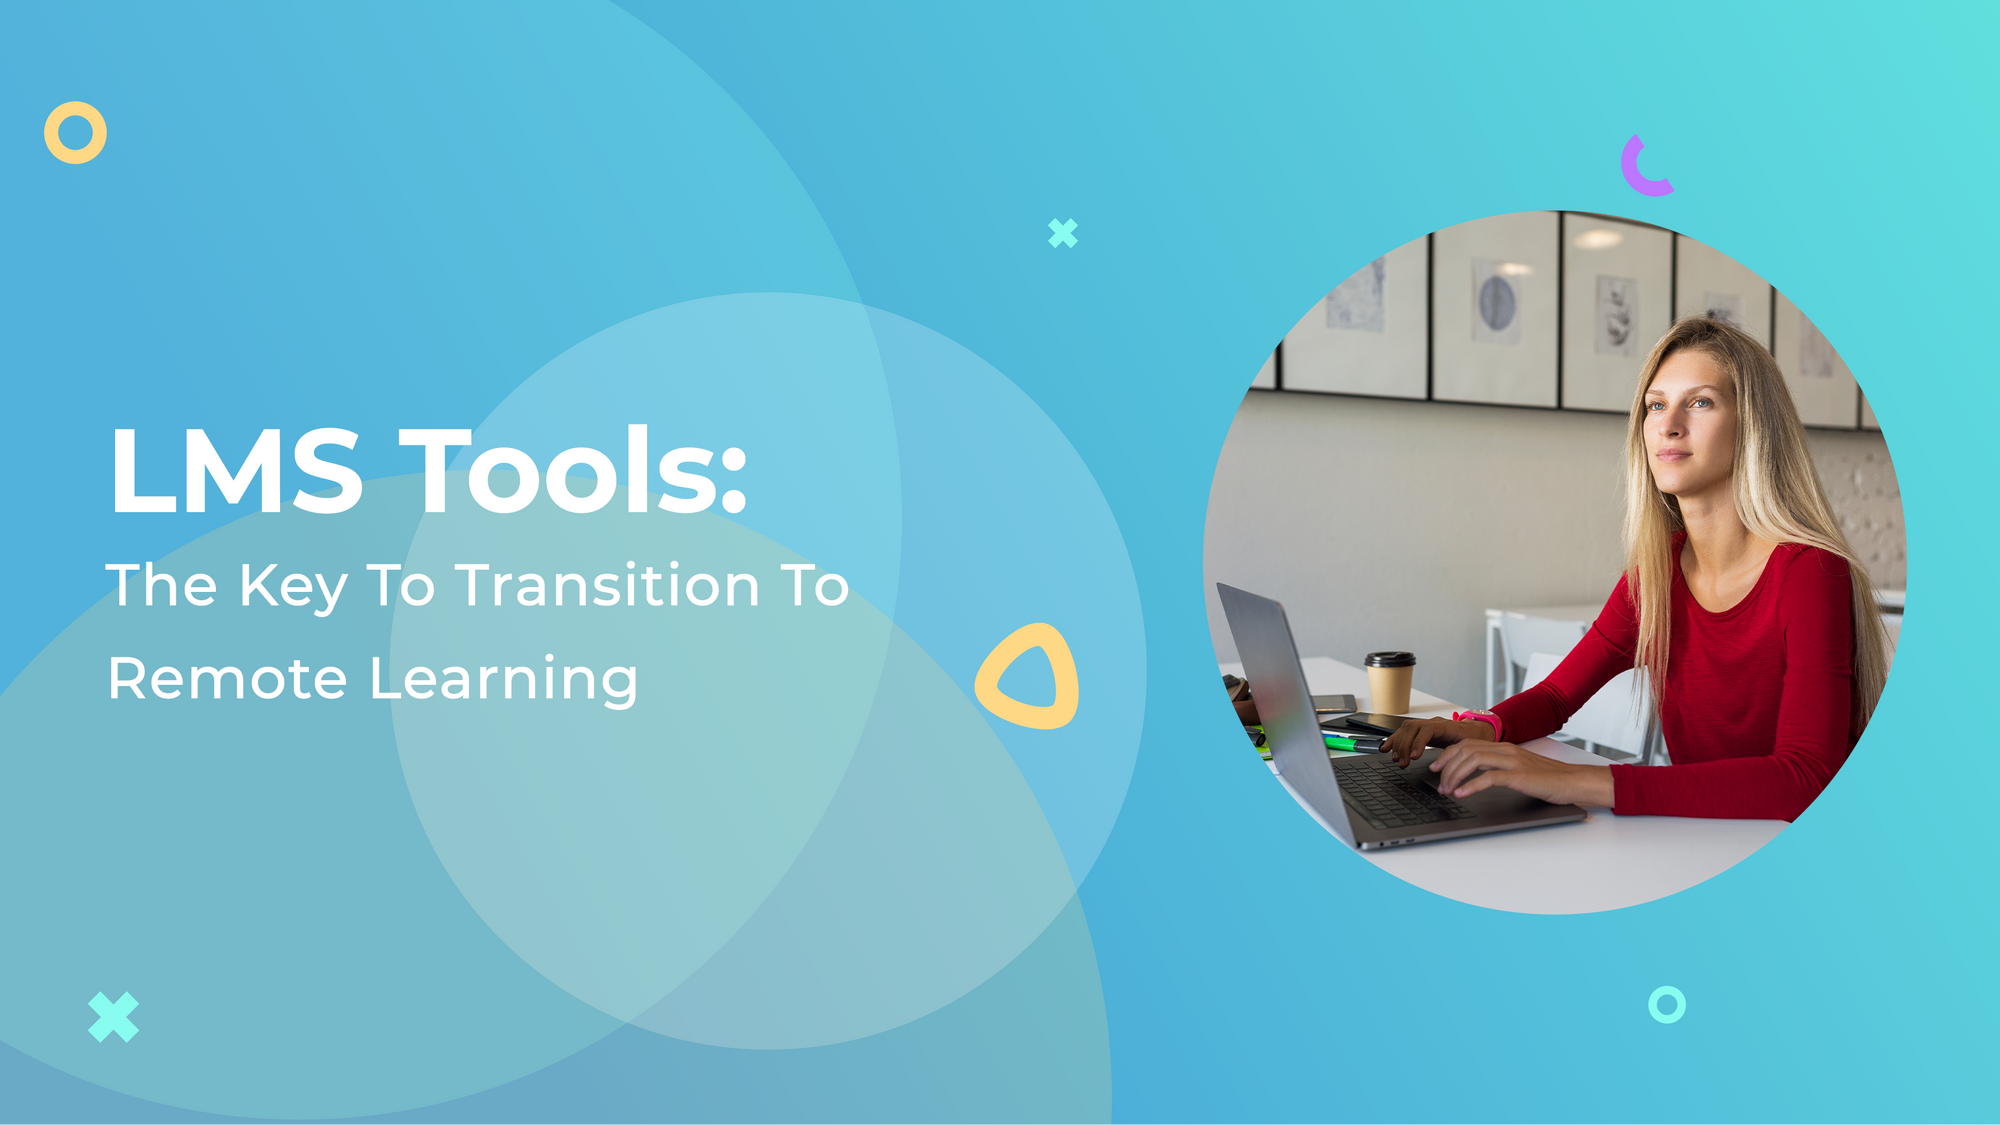 LMS Tools: The Key To Transition To Remote Learning